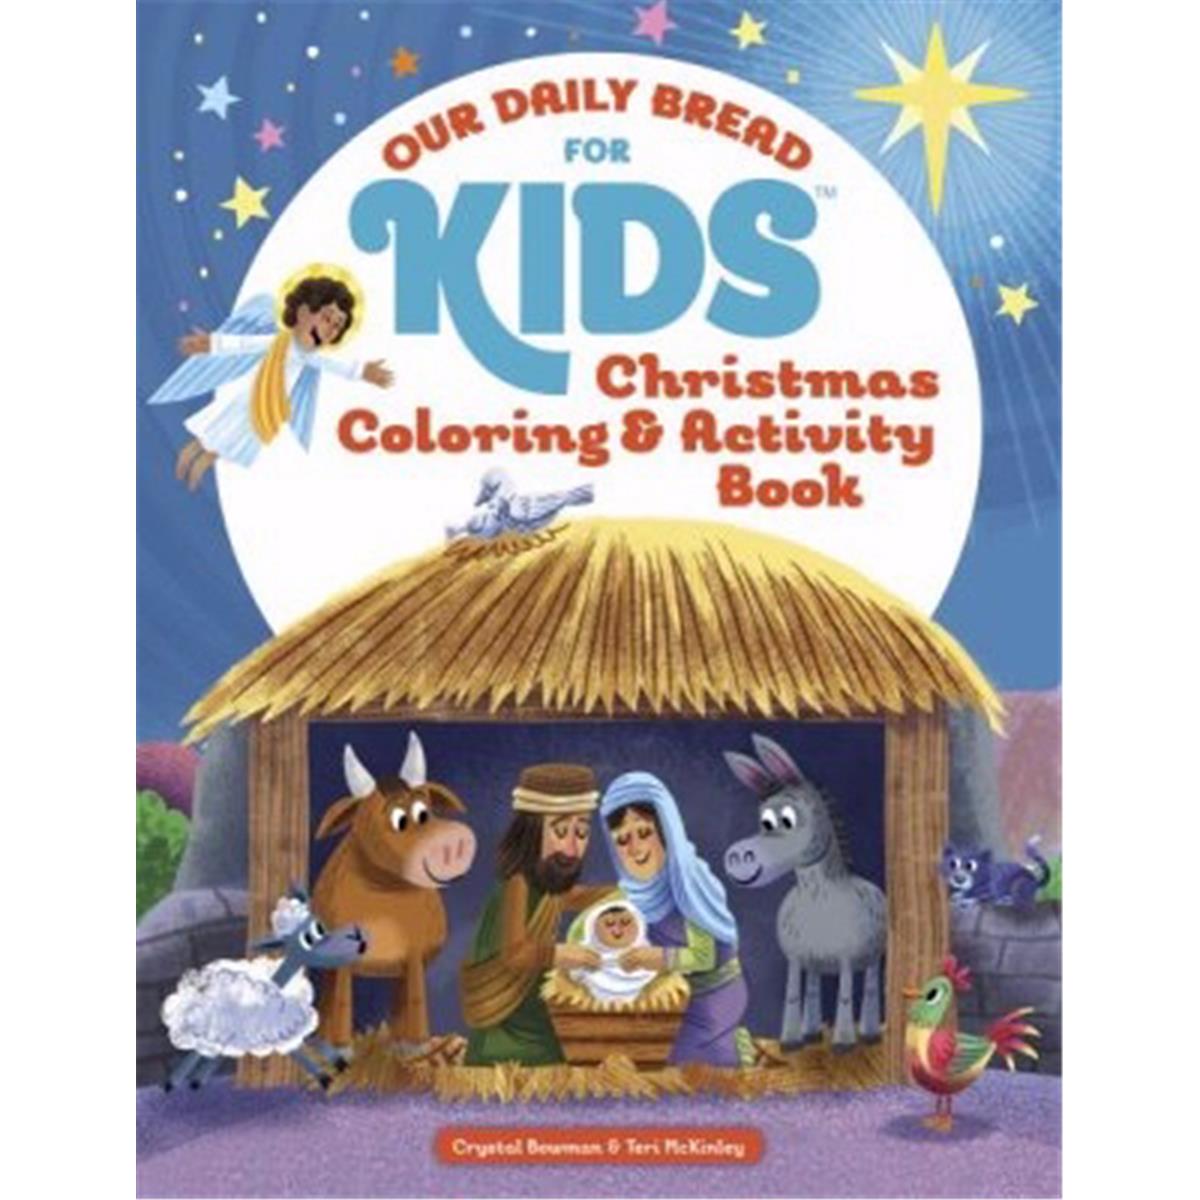 143721 Our Daily Bread For Kids Christmas Coloring & Activity Book